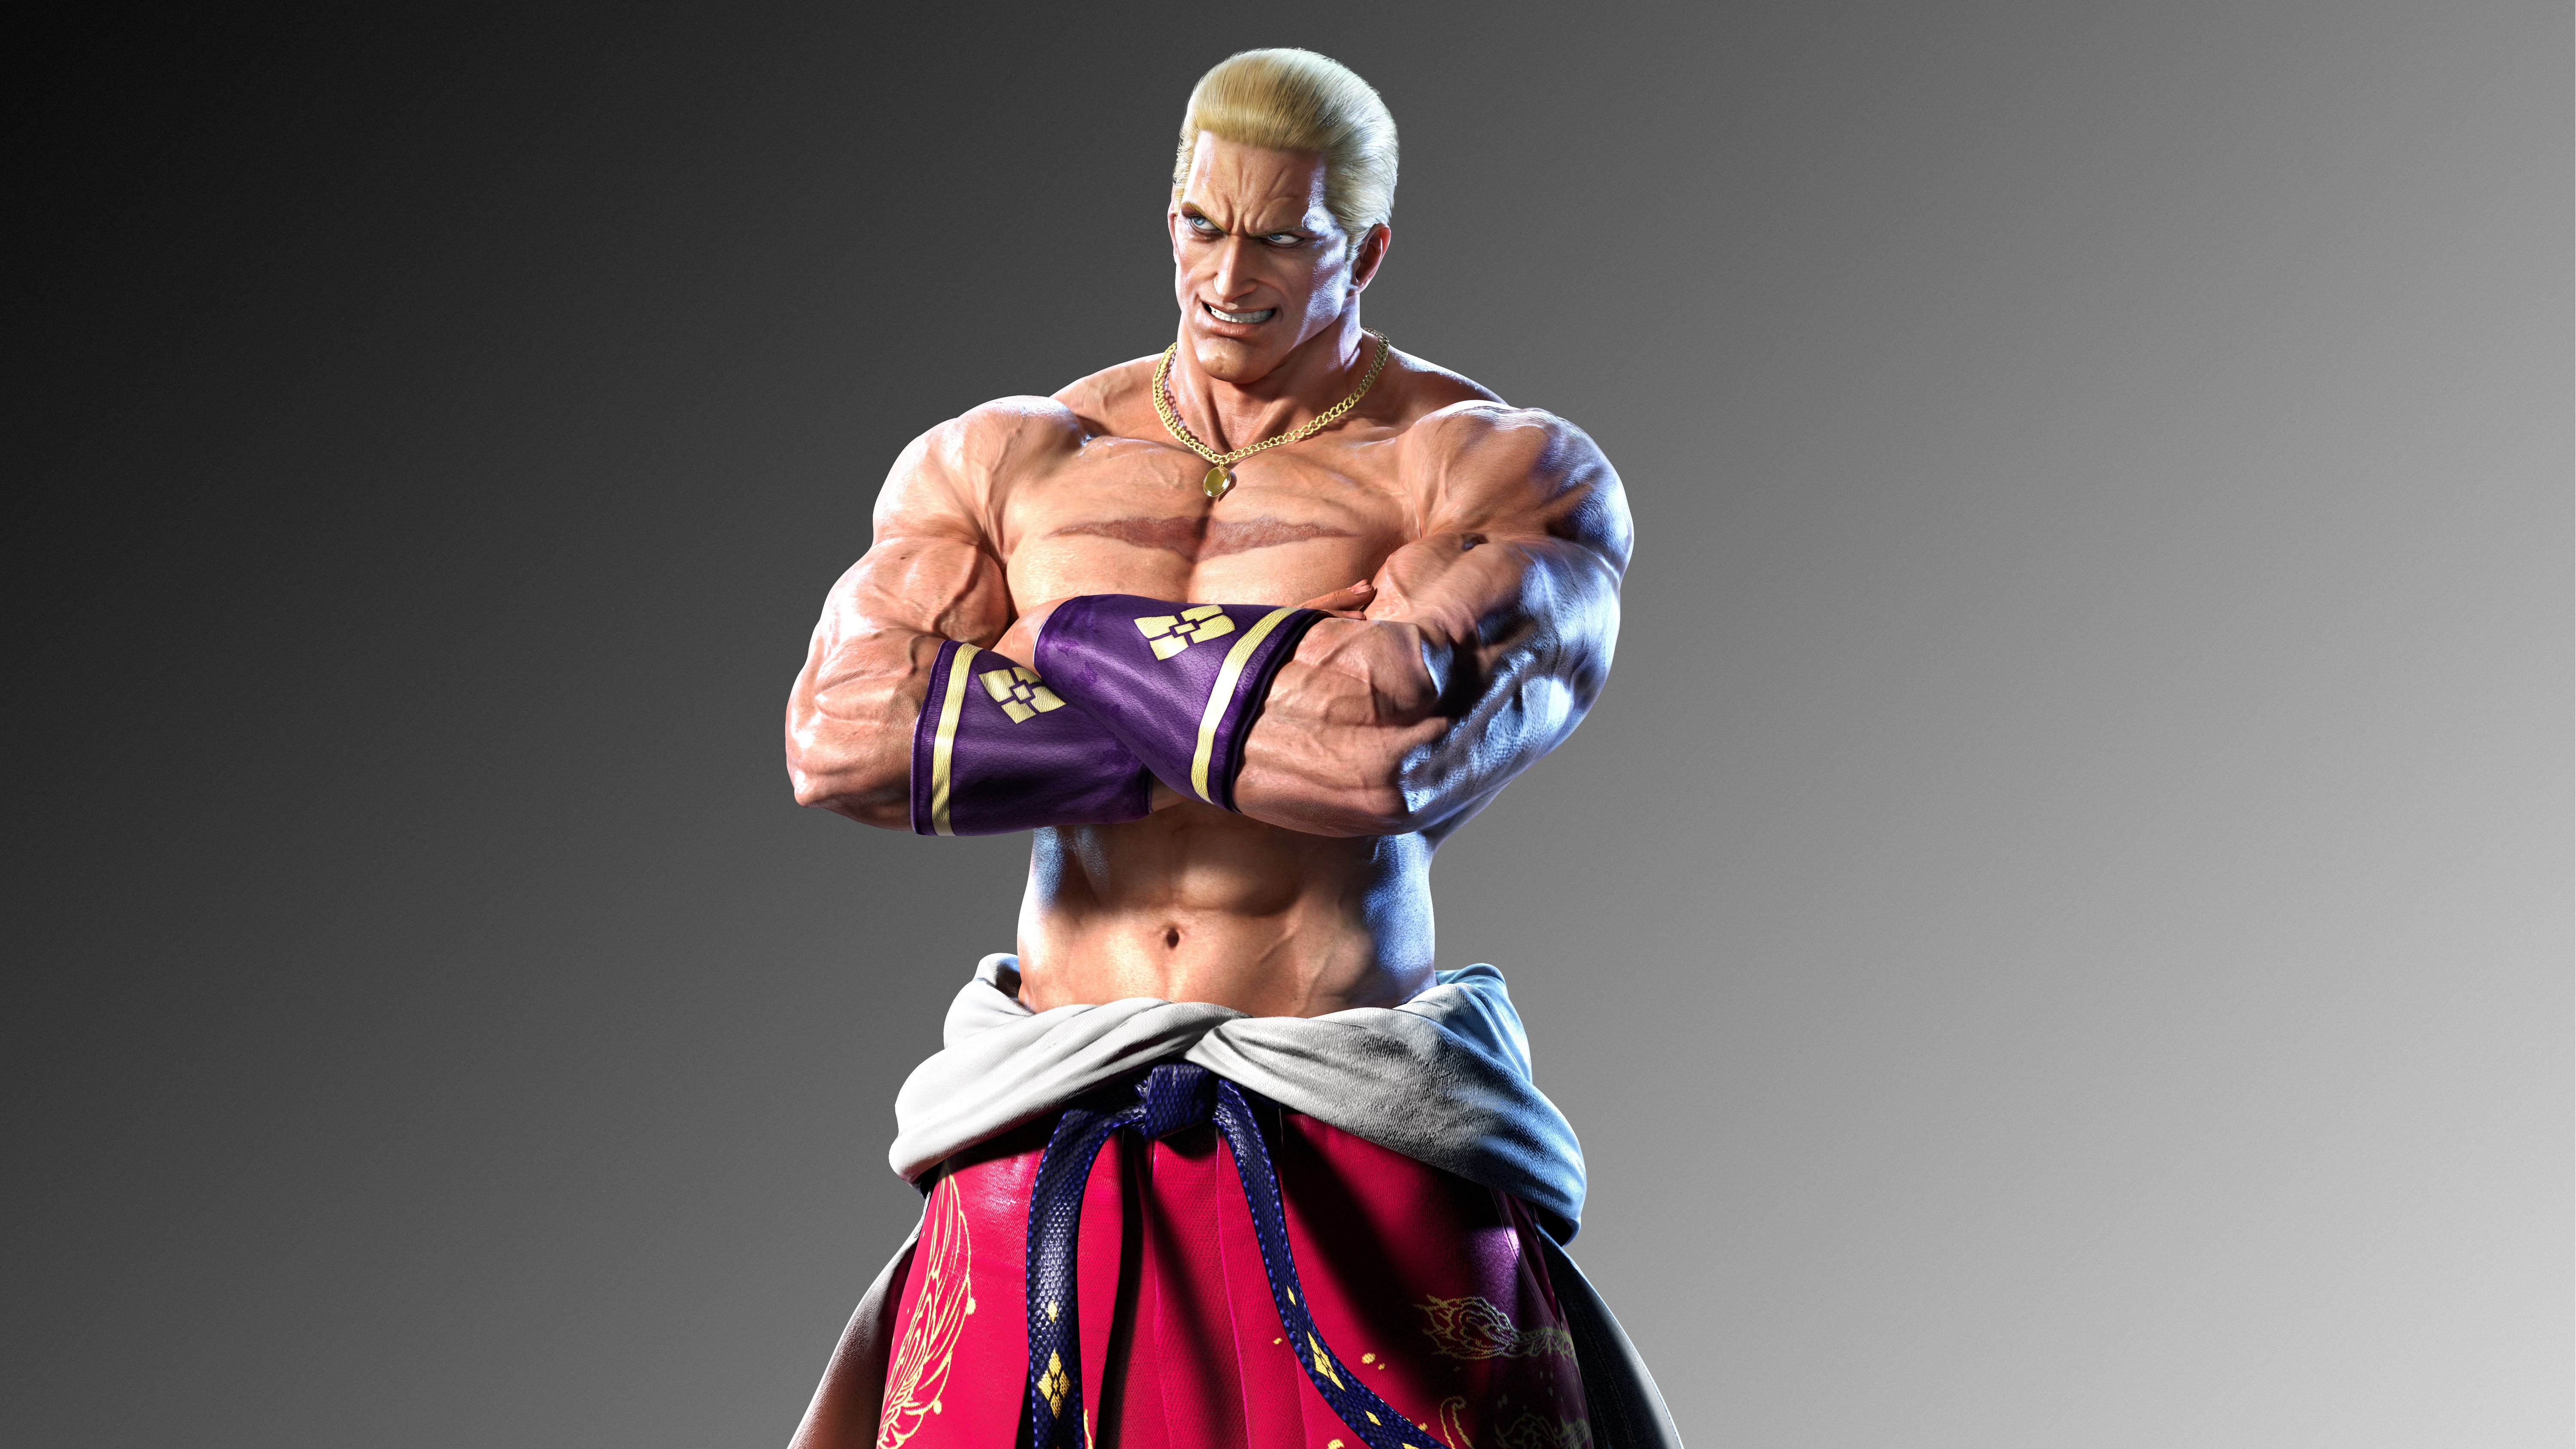 Geese Howard Tekken 7 5k Ultra, HD Games, 4k Wallpaper, Image, Background, Photo and Picture